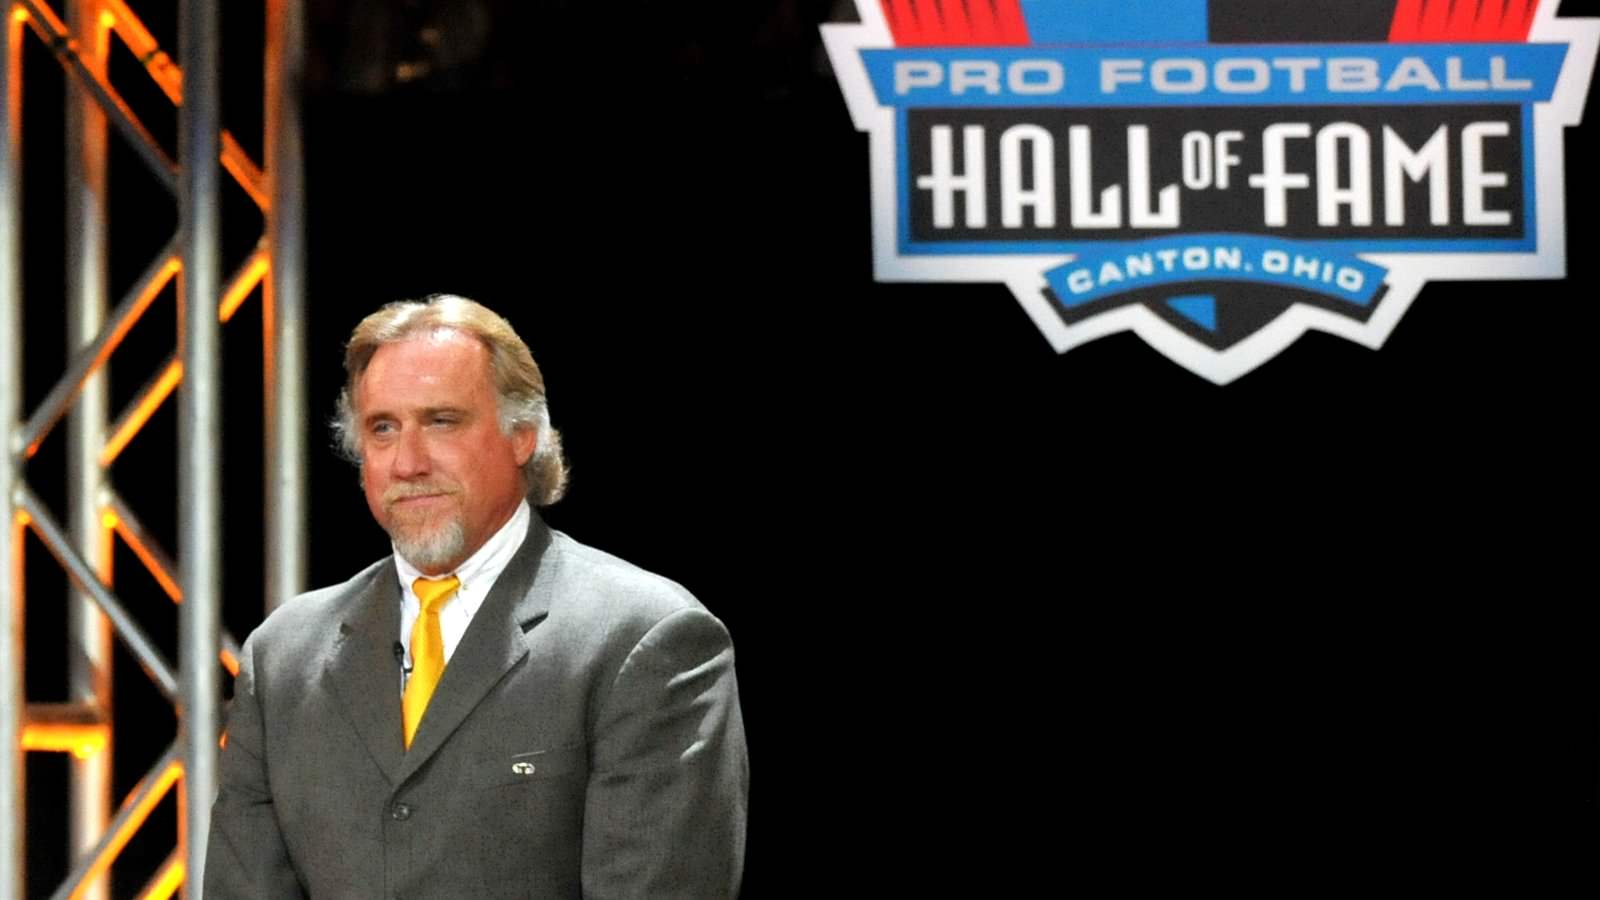 NFL Hall of Fame Kevin Greene morre aos 58 anos